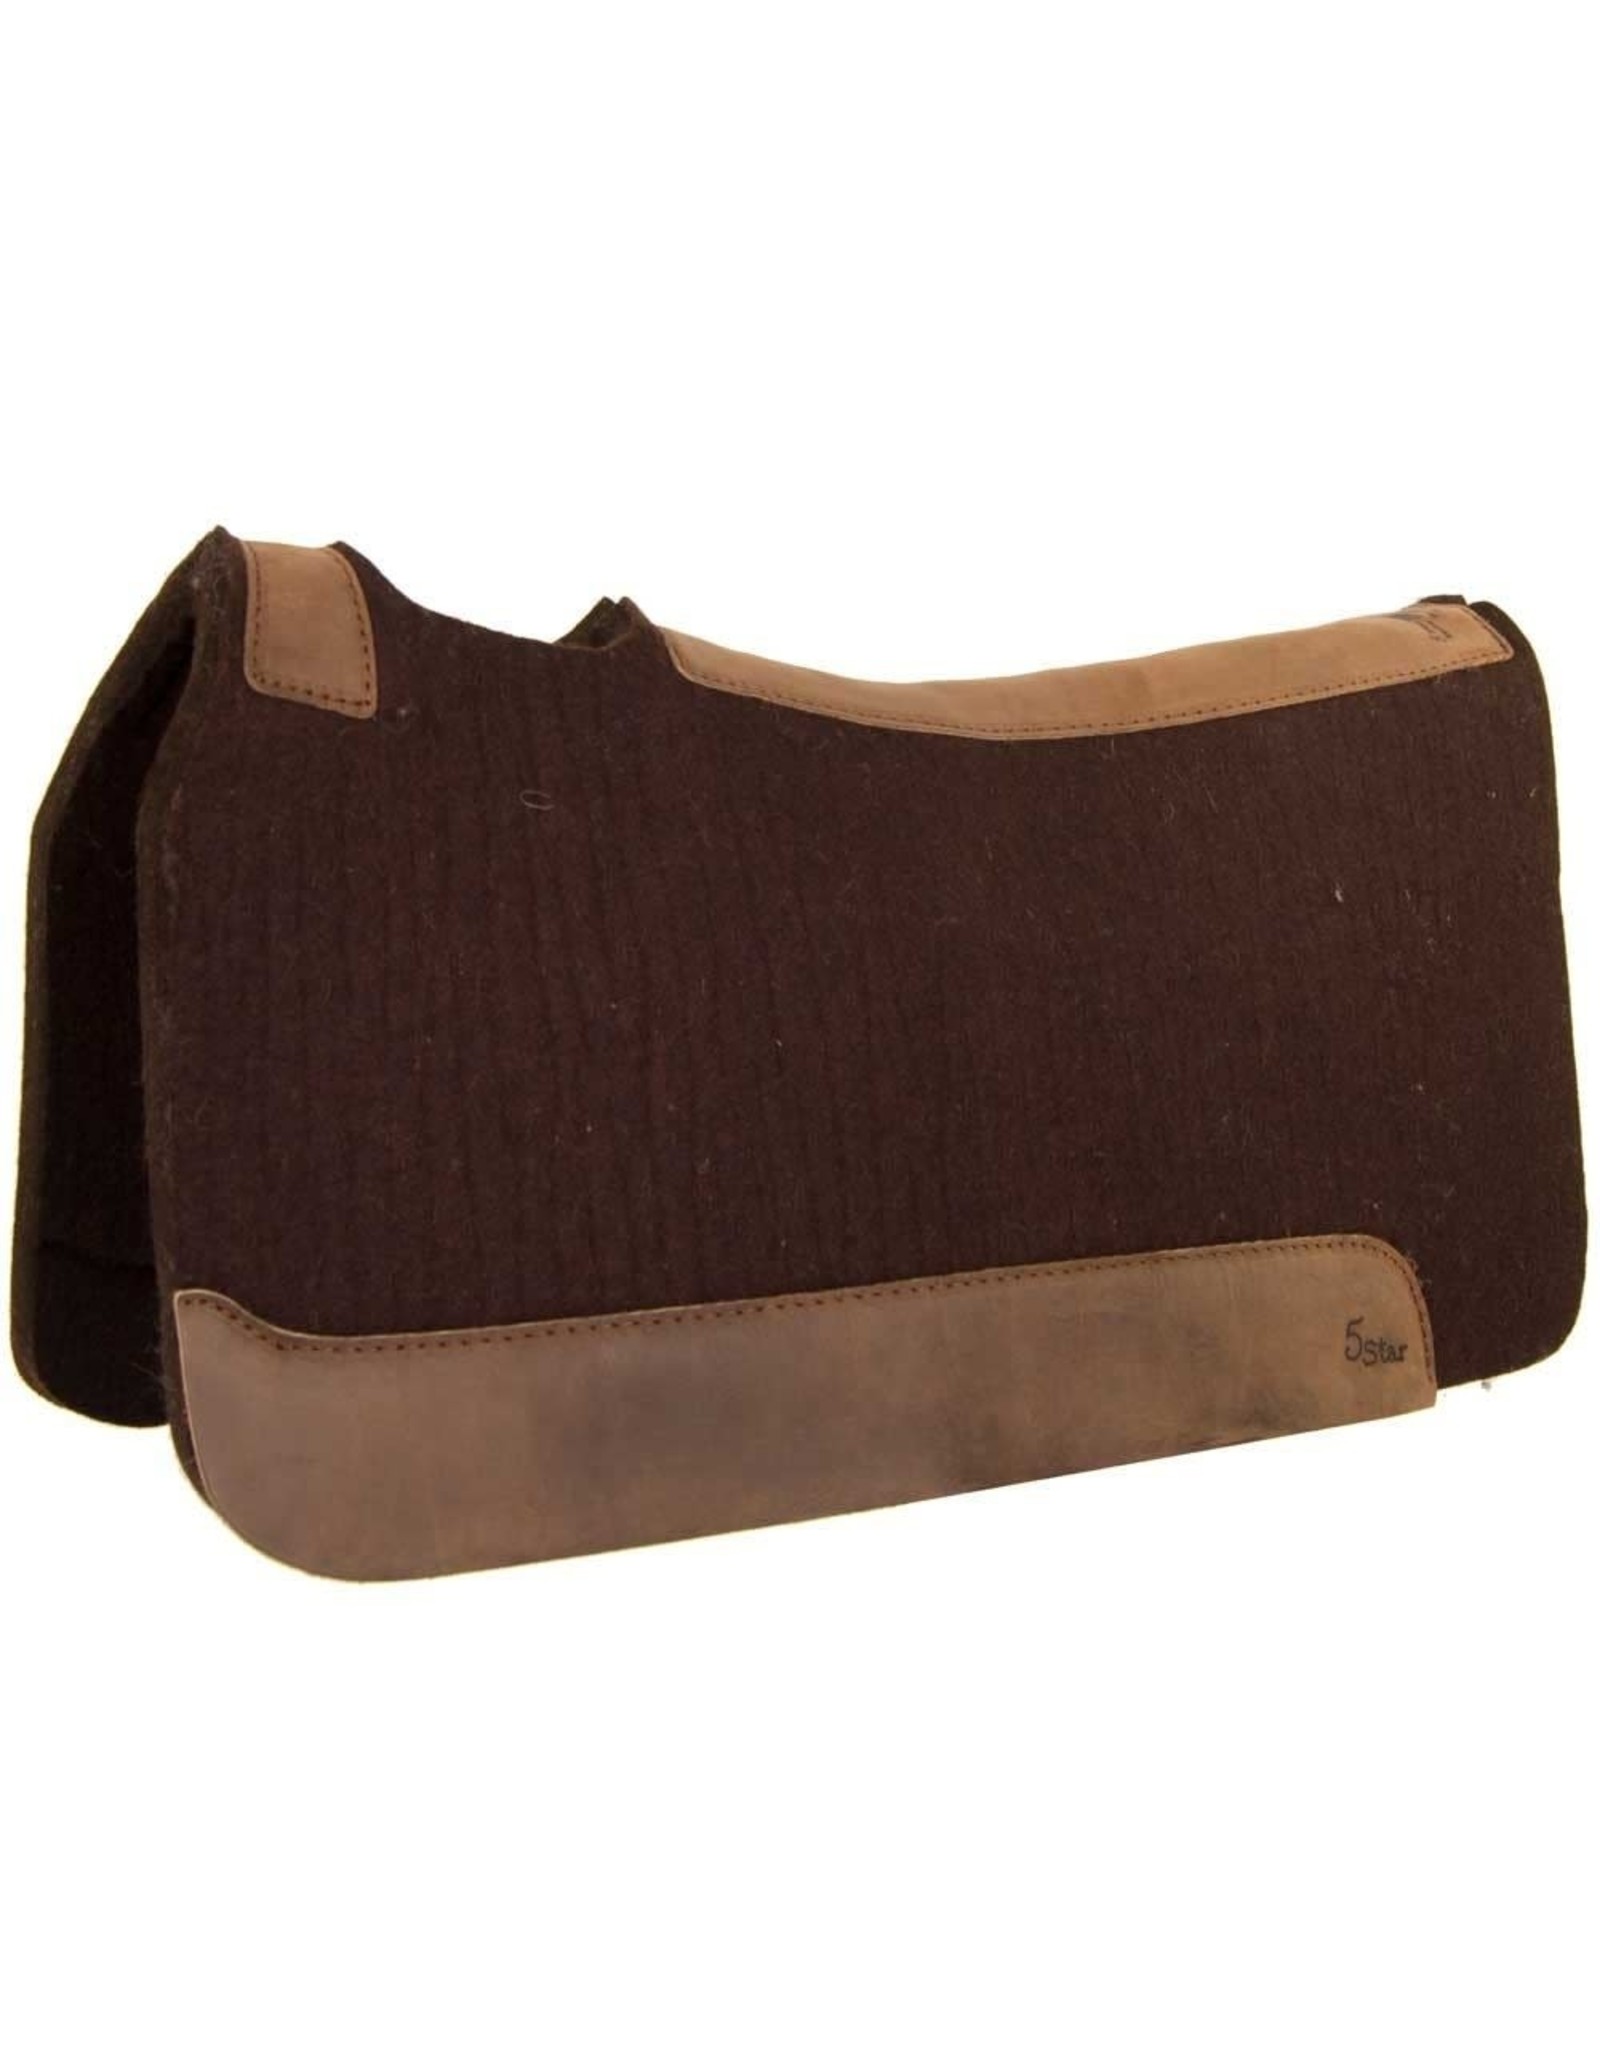 5 Star Equine Products 5 Star Equine 2WC-DK-FS 7/8" Western Dark Chocolate Contour Pad 32X32 with Cinch Cutouts